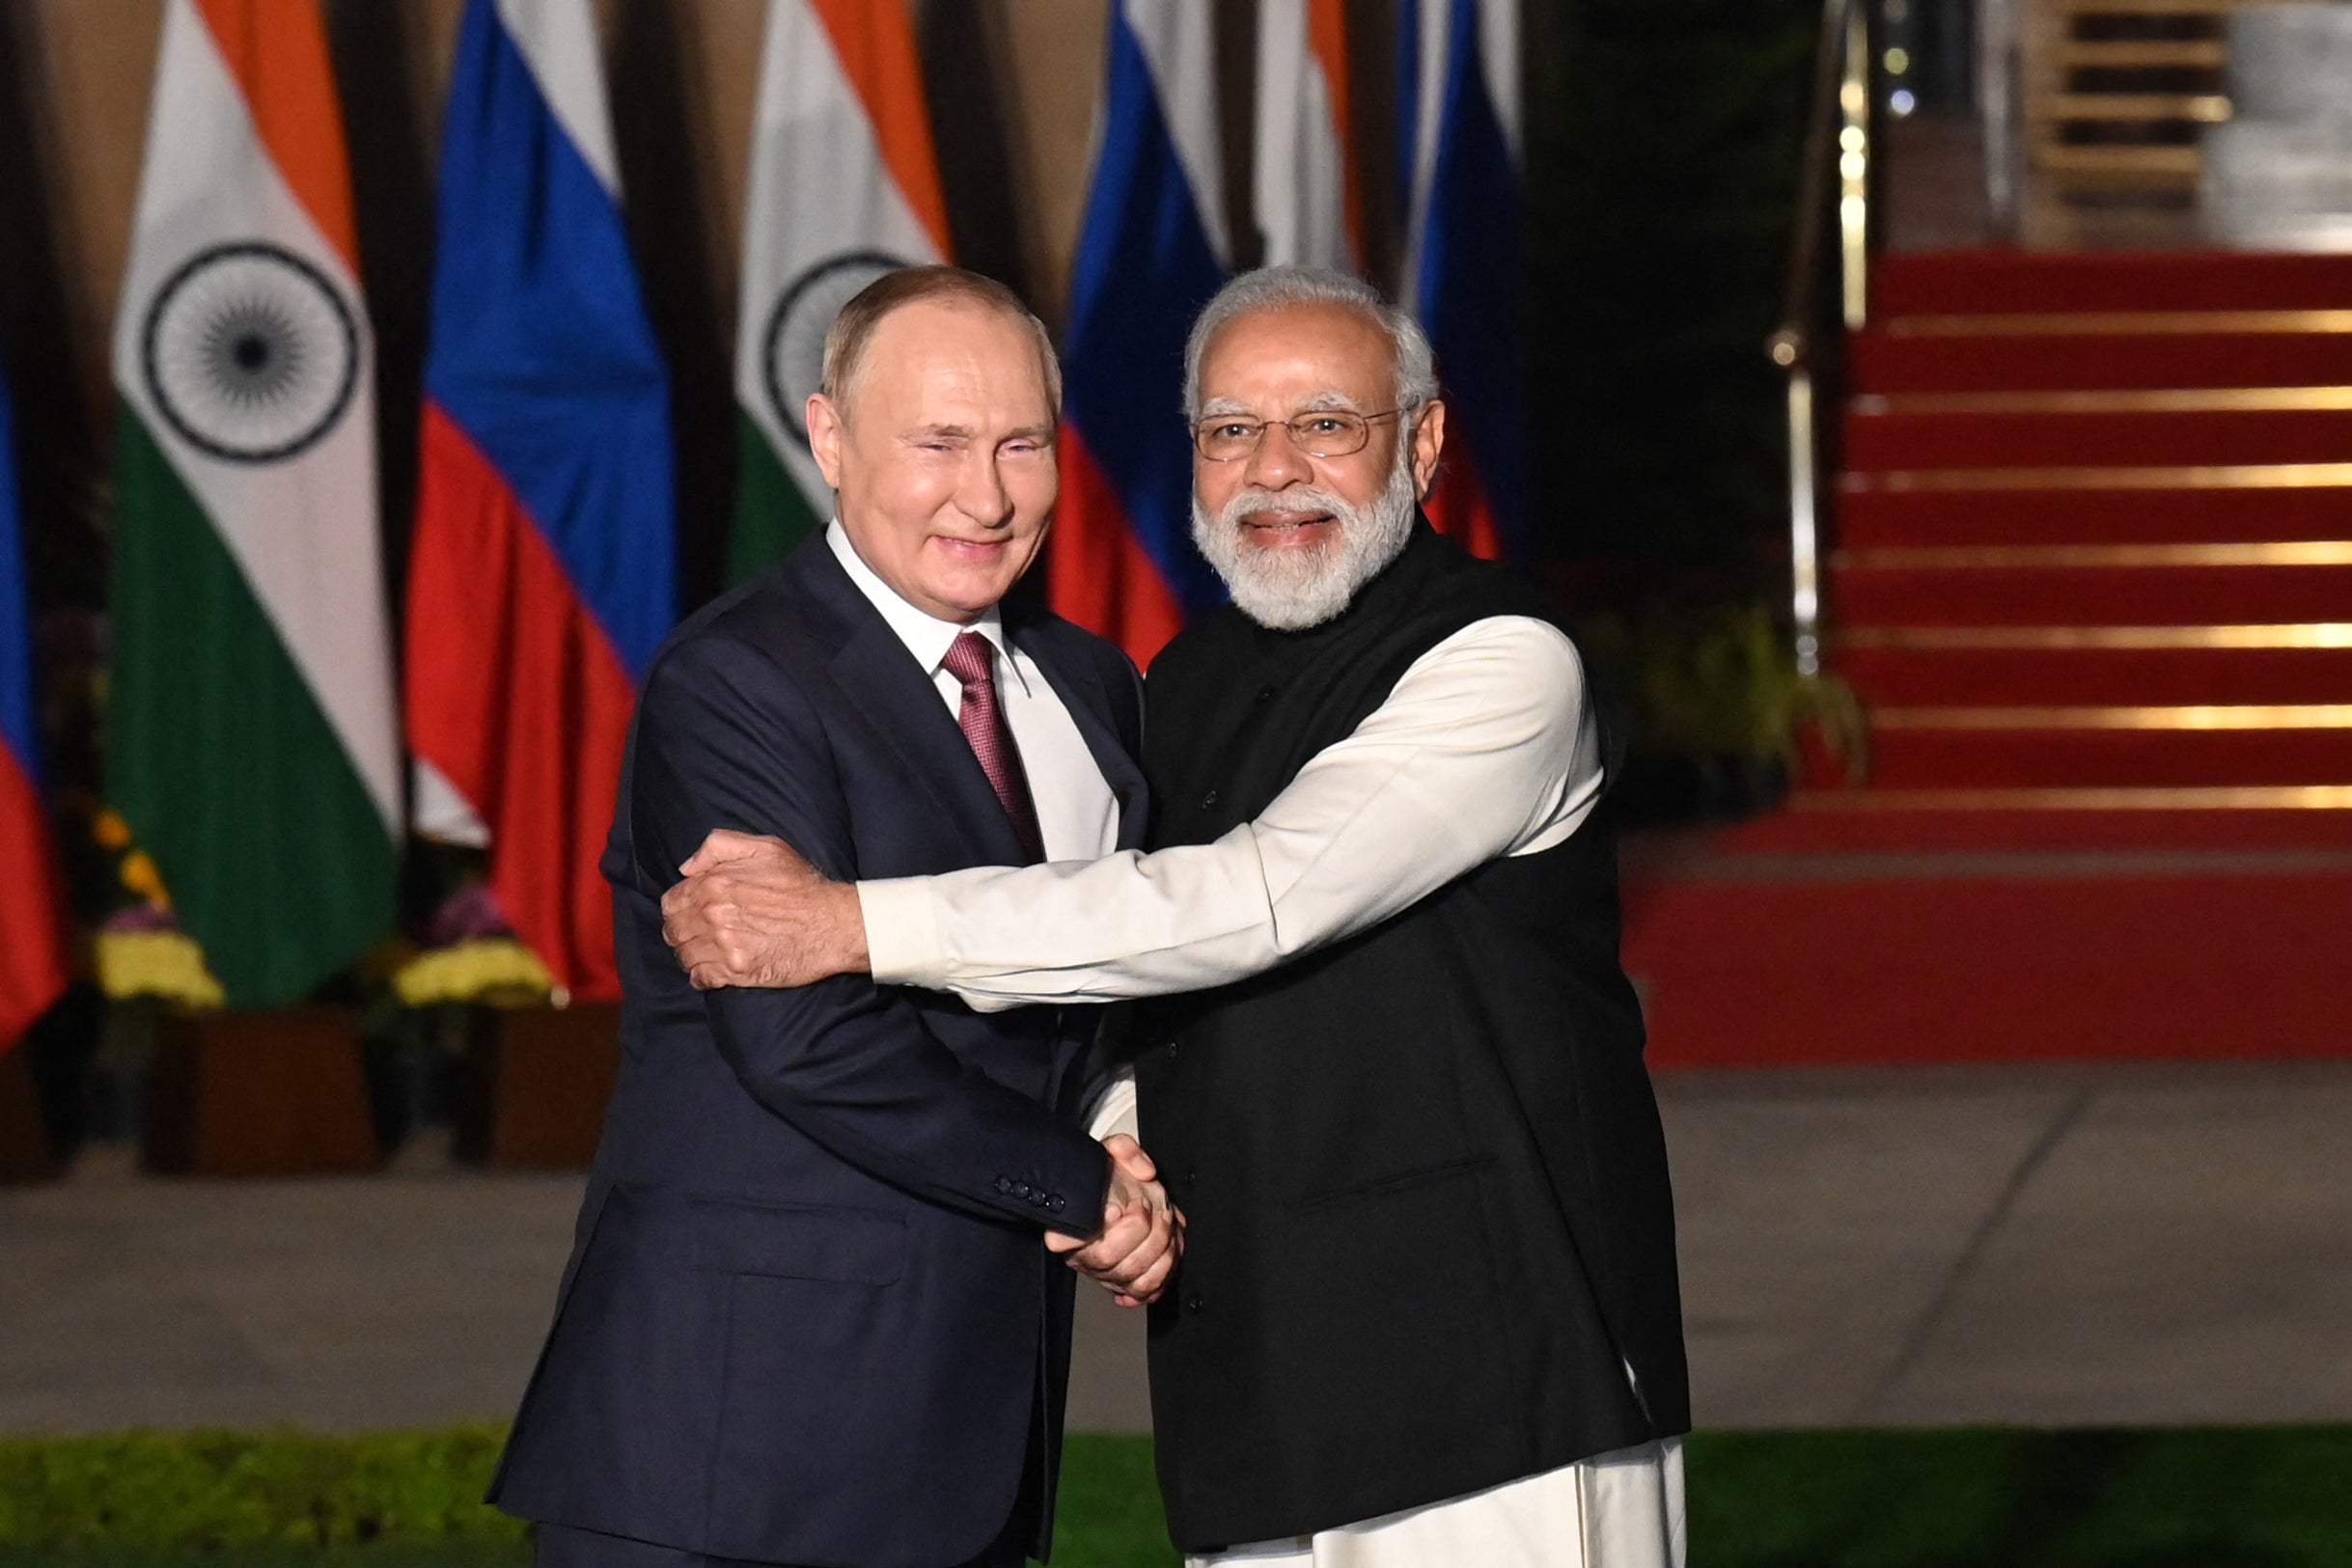 Indian Prime Minister Narendra Modi (R) welcomes Russian President Vladimir Putin prior to their meeting at Hyderabad House in New Delhi in 2018